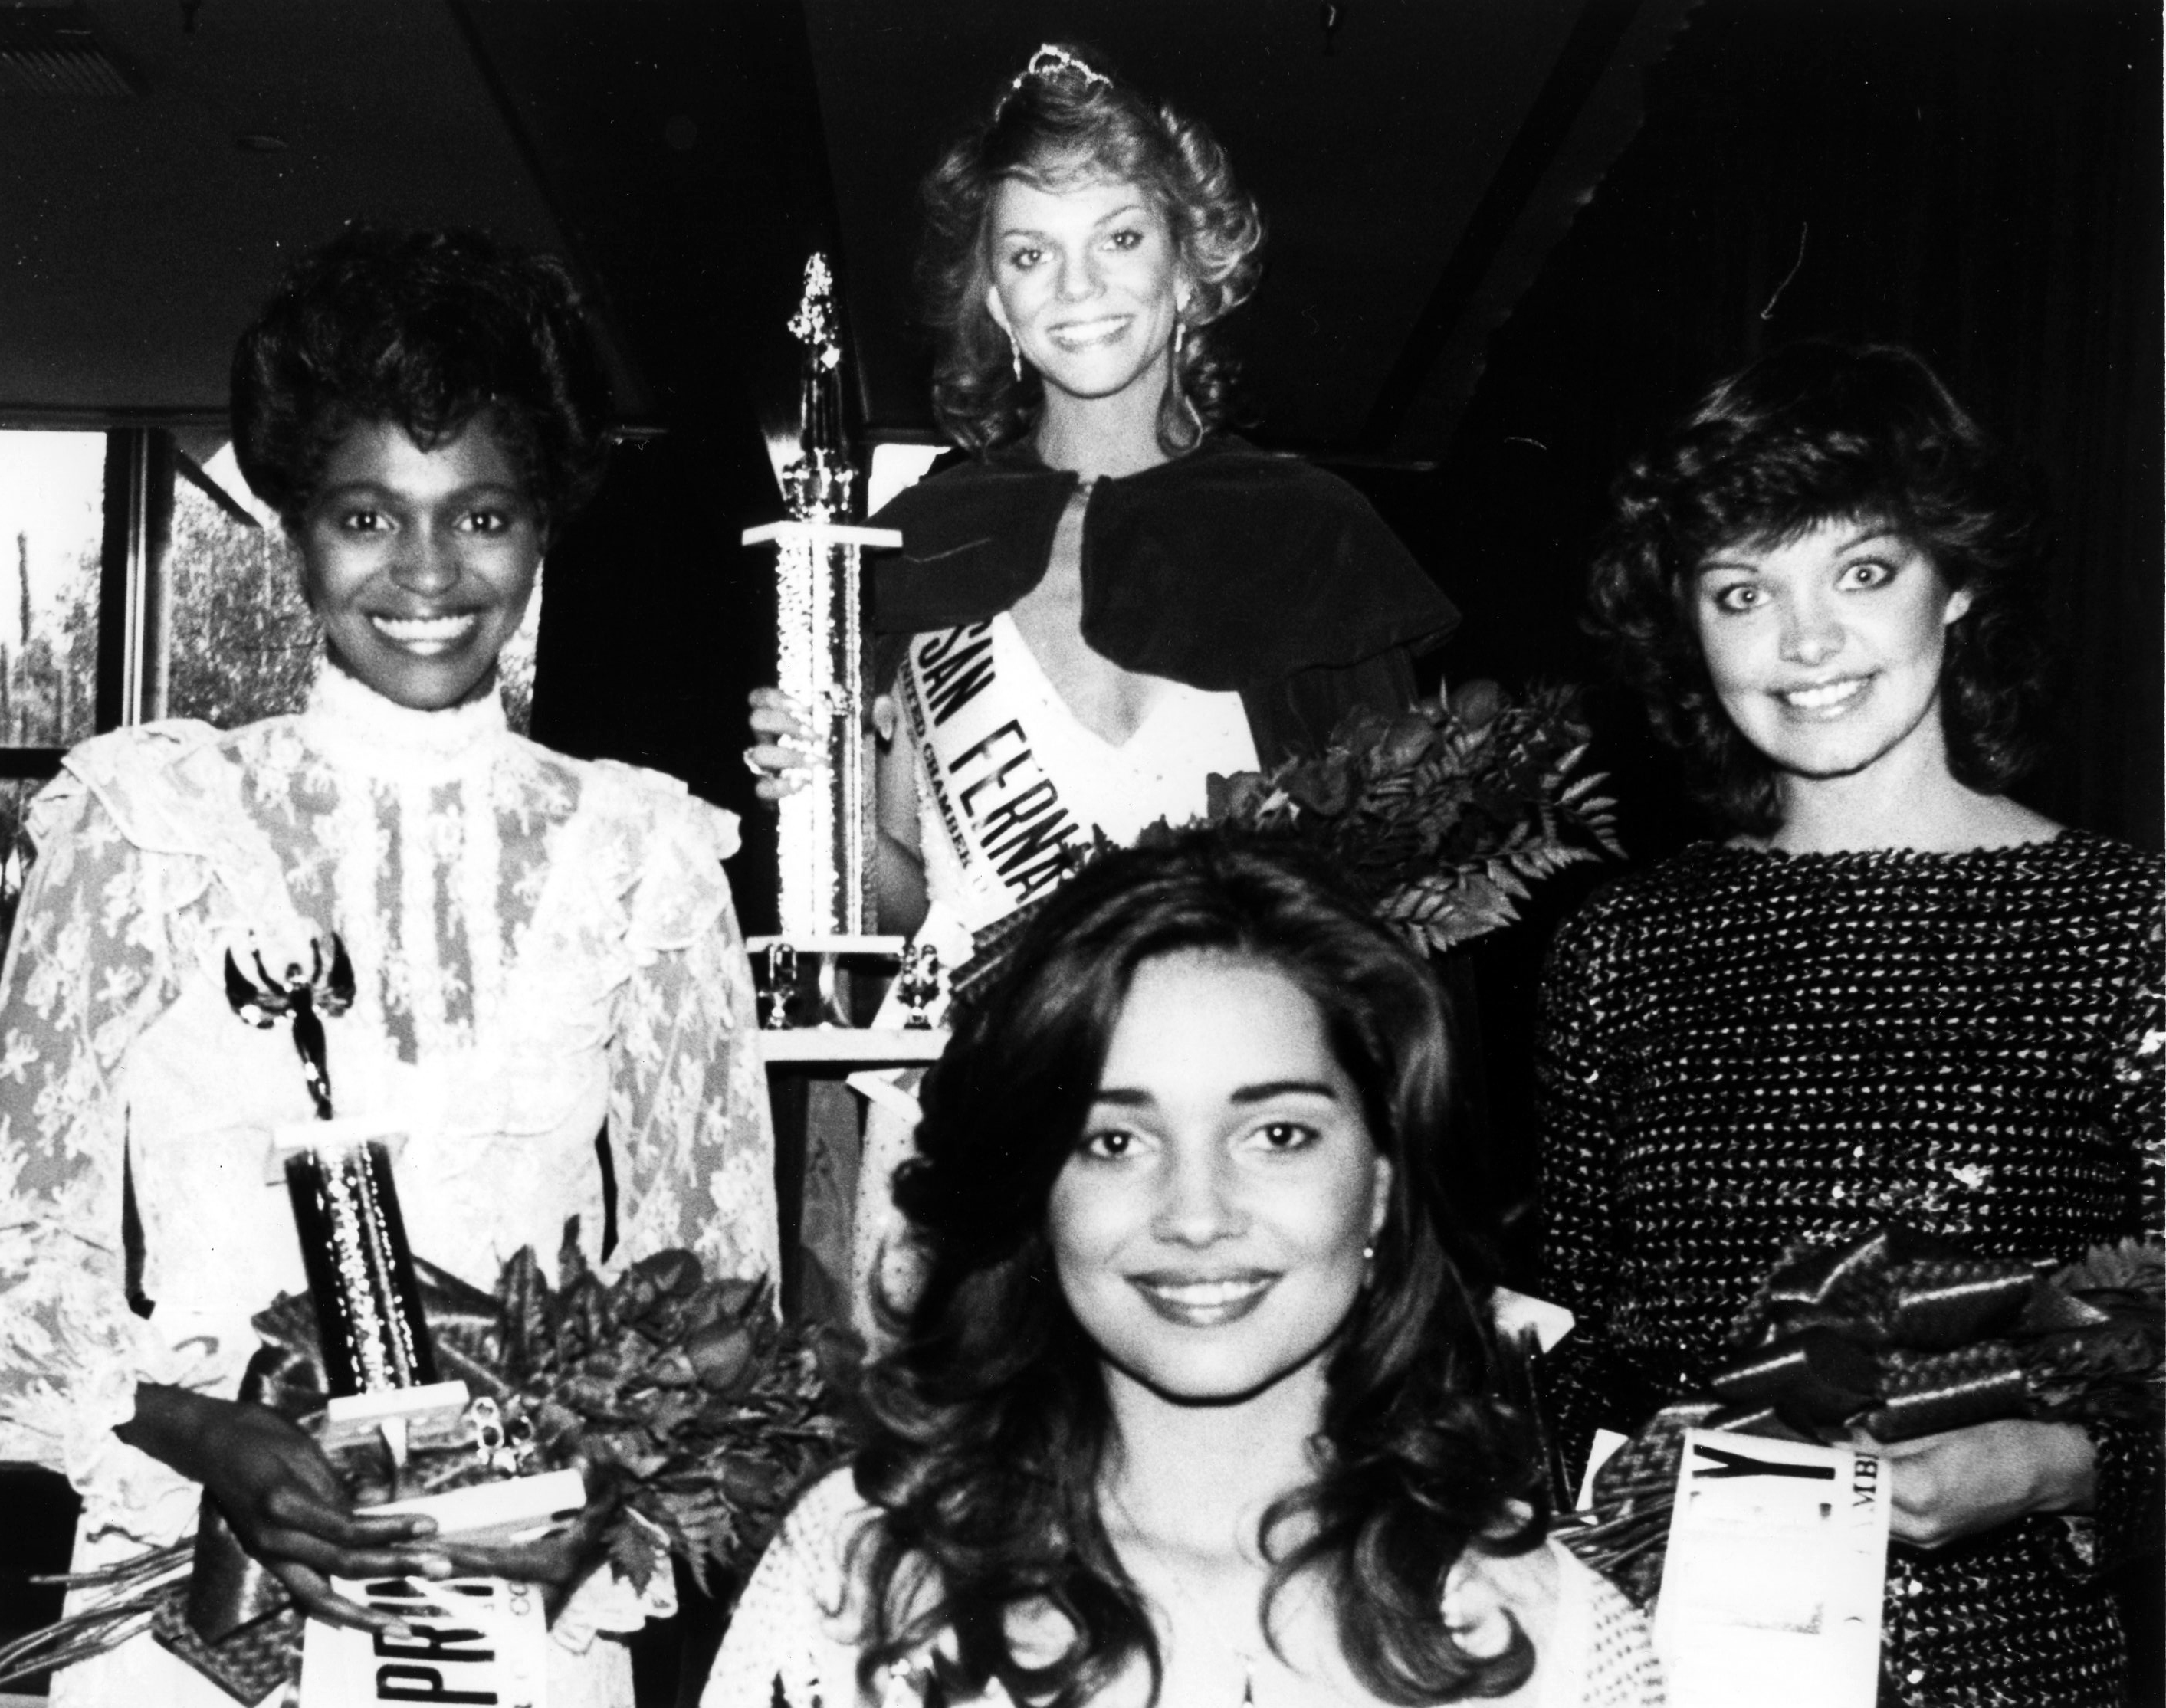 A diverse group of four women; the pageant queen wears a crown, with the three runners up, holding trophies and bouquets.